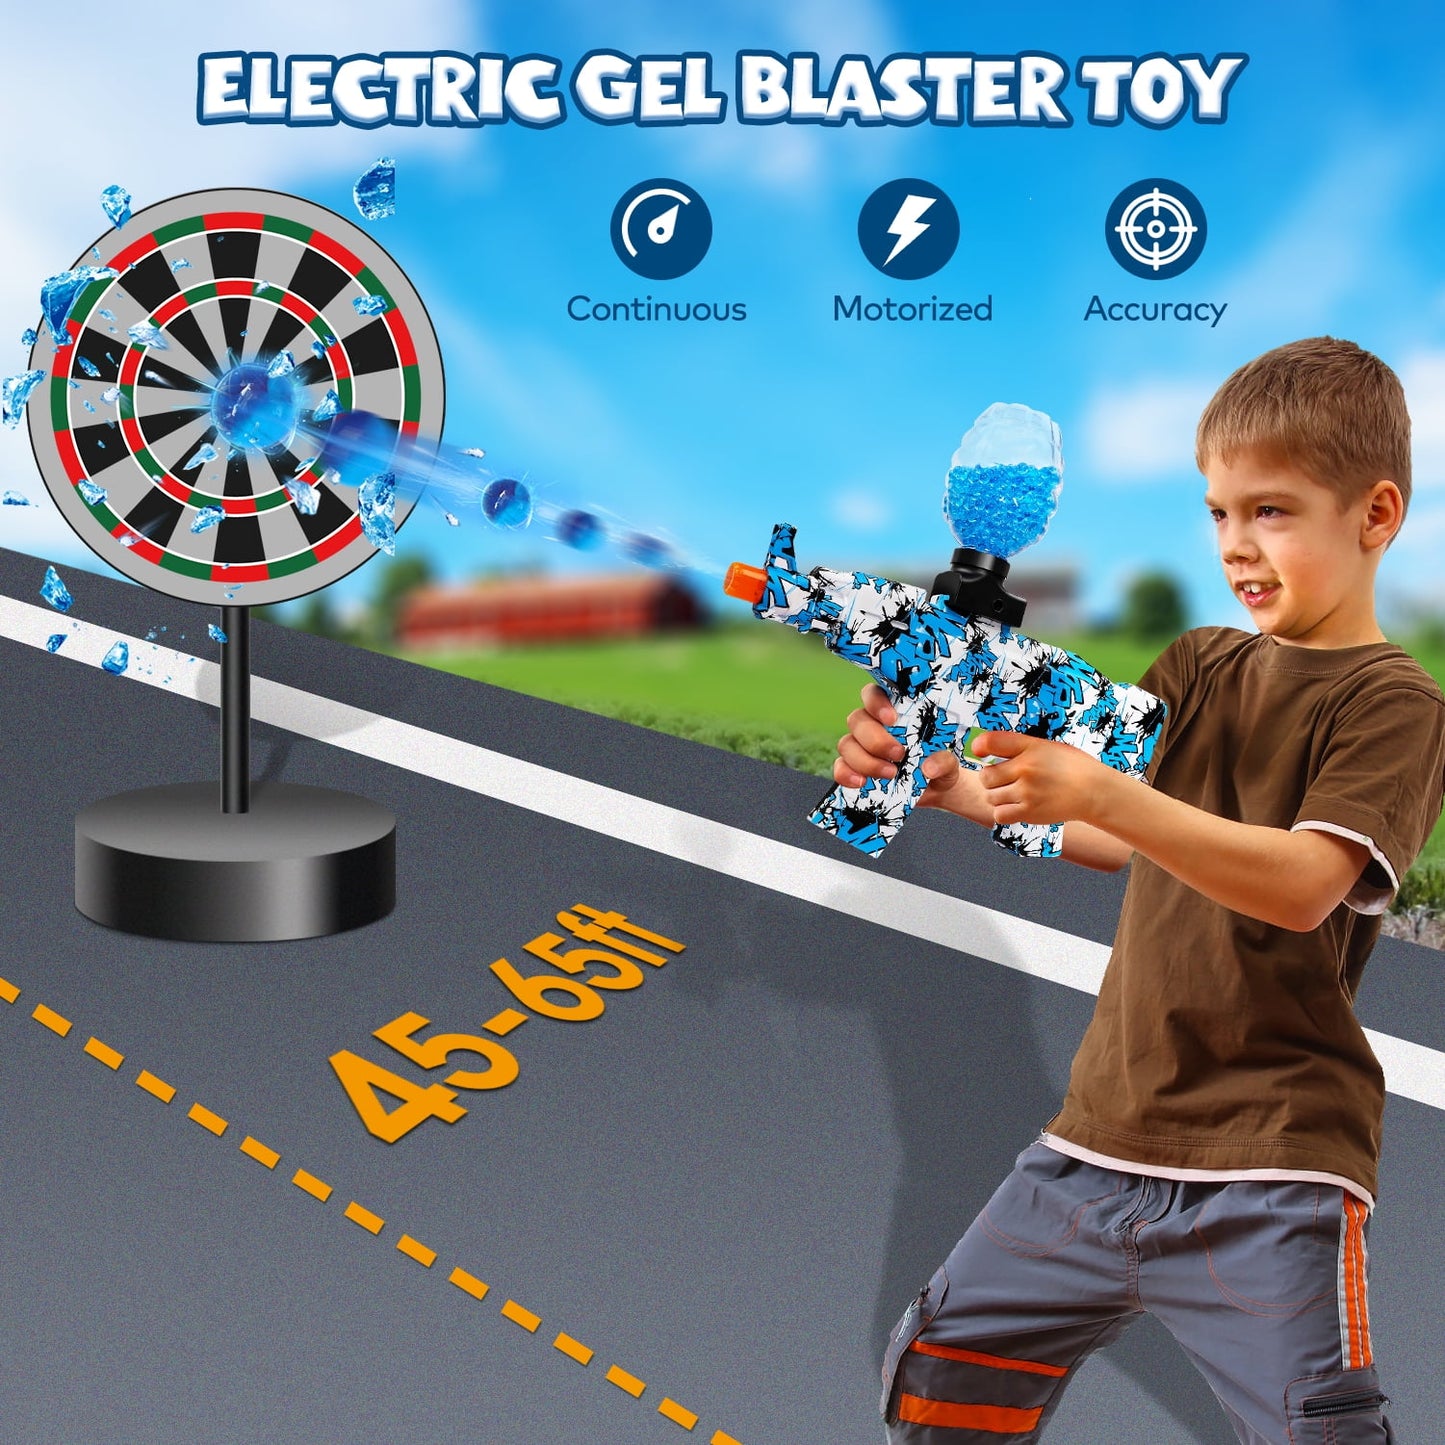 Gel Blaster Kit, Rechargeable Electric Gel Blaster Outdoor Activities Games for Kids Boys and Girls Age 8+